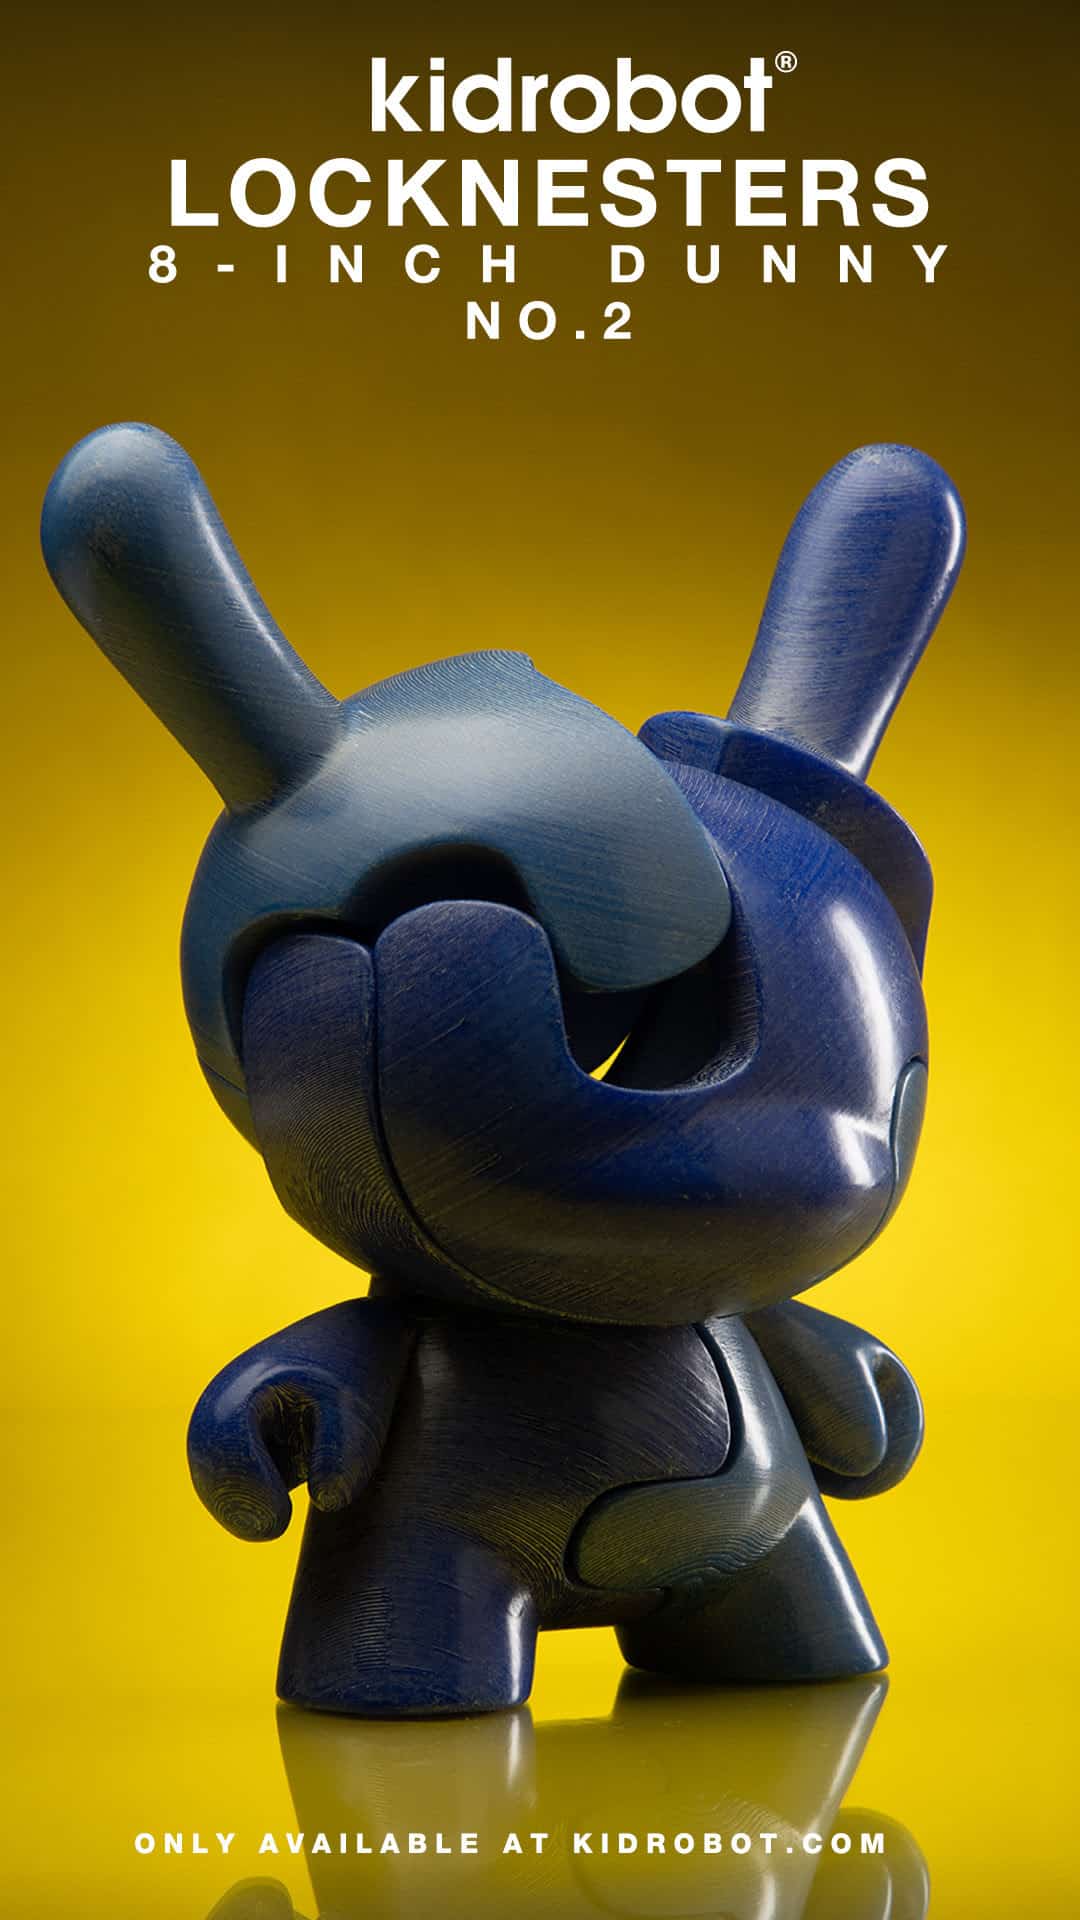 Kidrobot x Locknesters Puzzle Dunny 8″ Art Figure, No.2 Drops in 30 Minutes Exclusively at Kidrobot.com